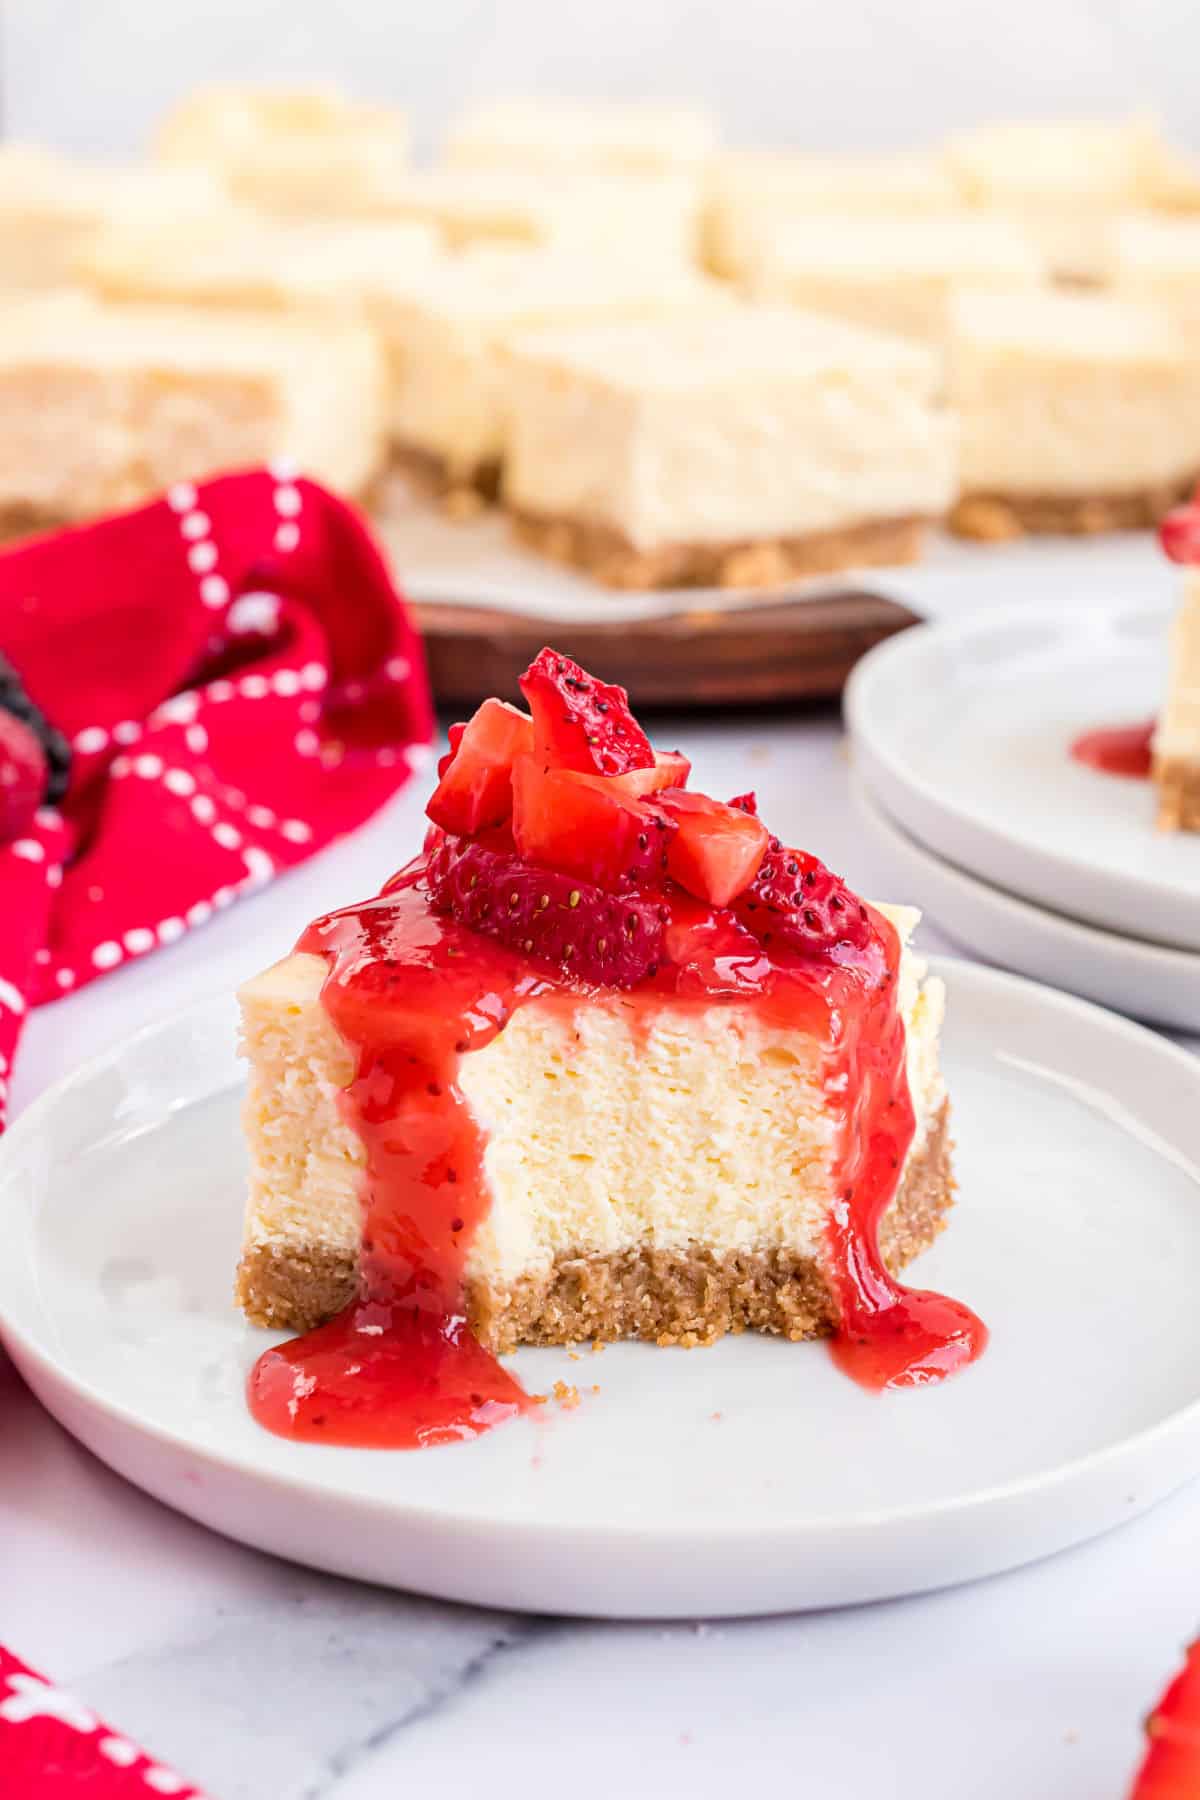 Strawberry sauce on top of cheesecake.